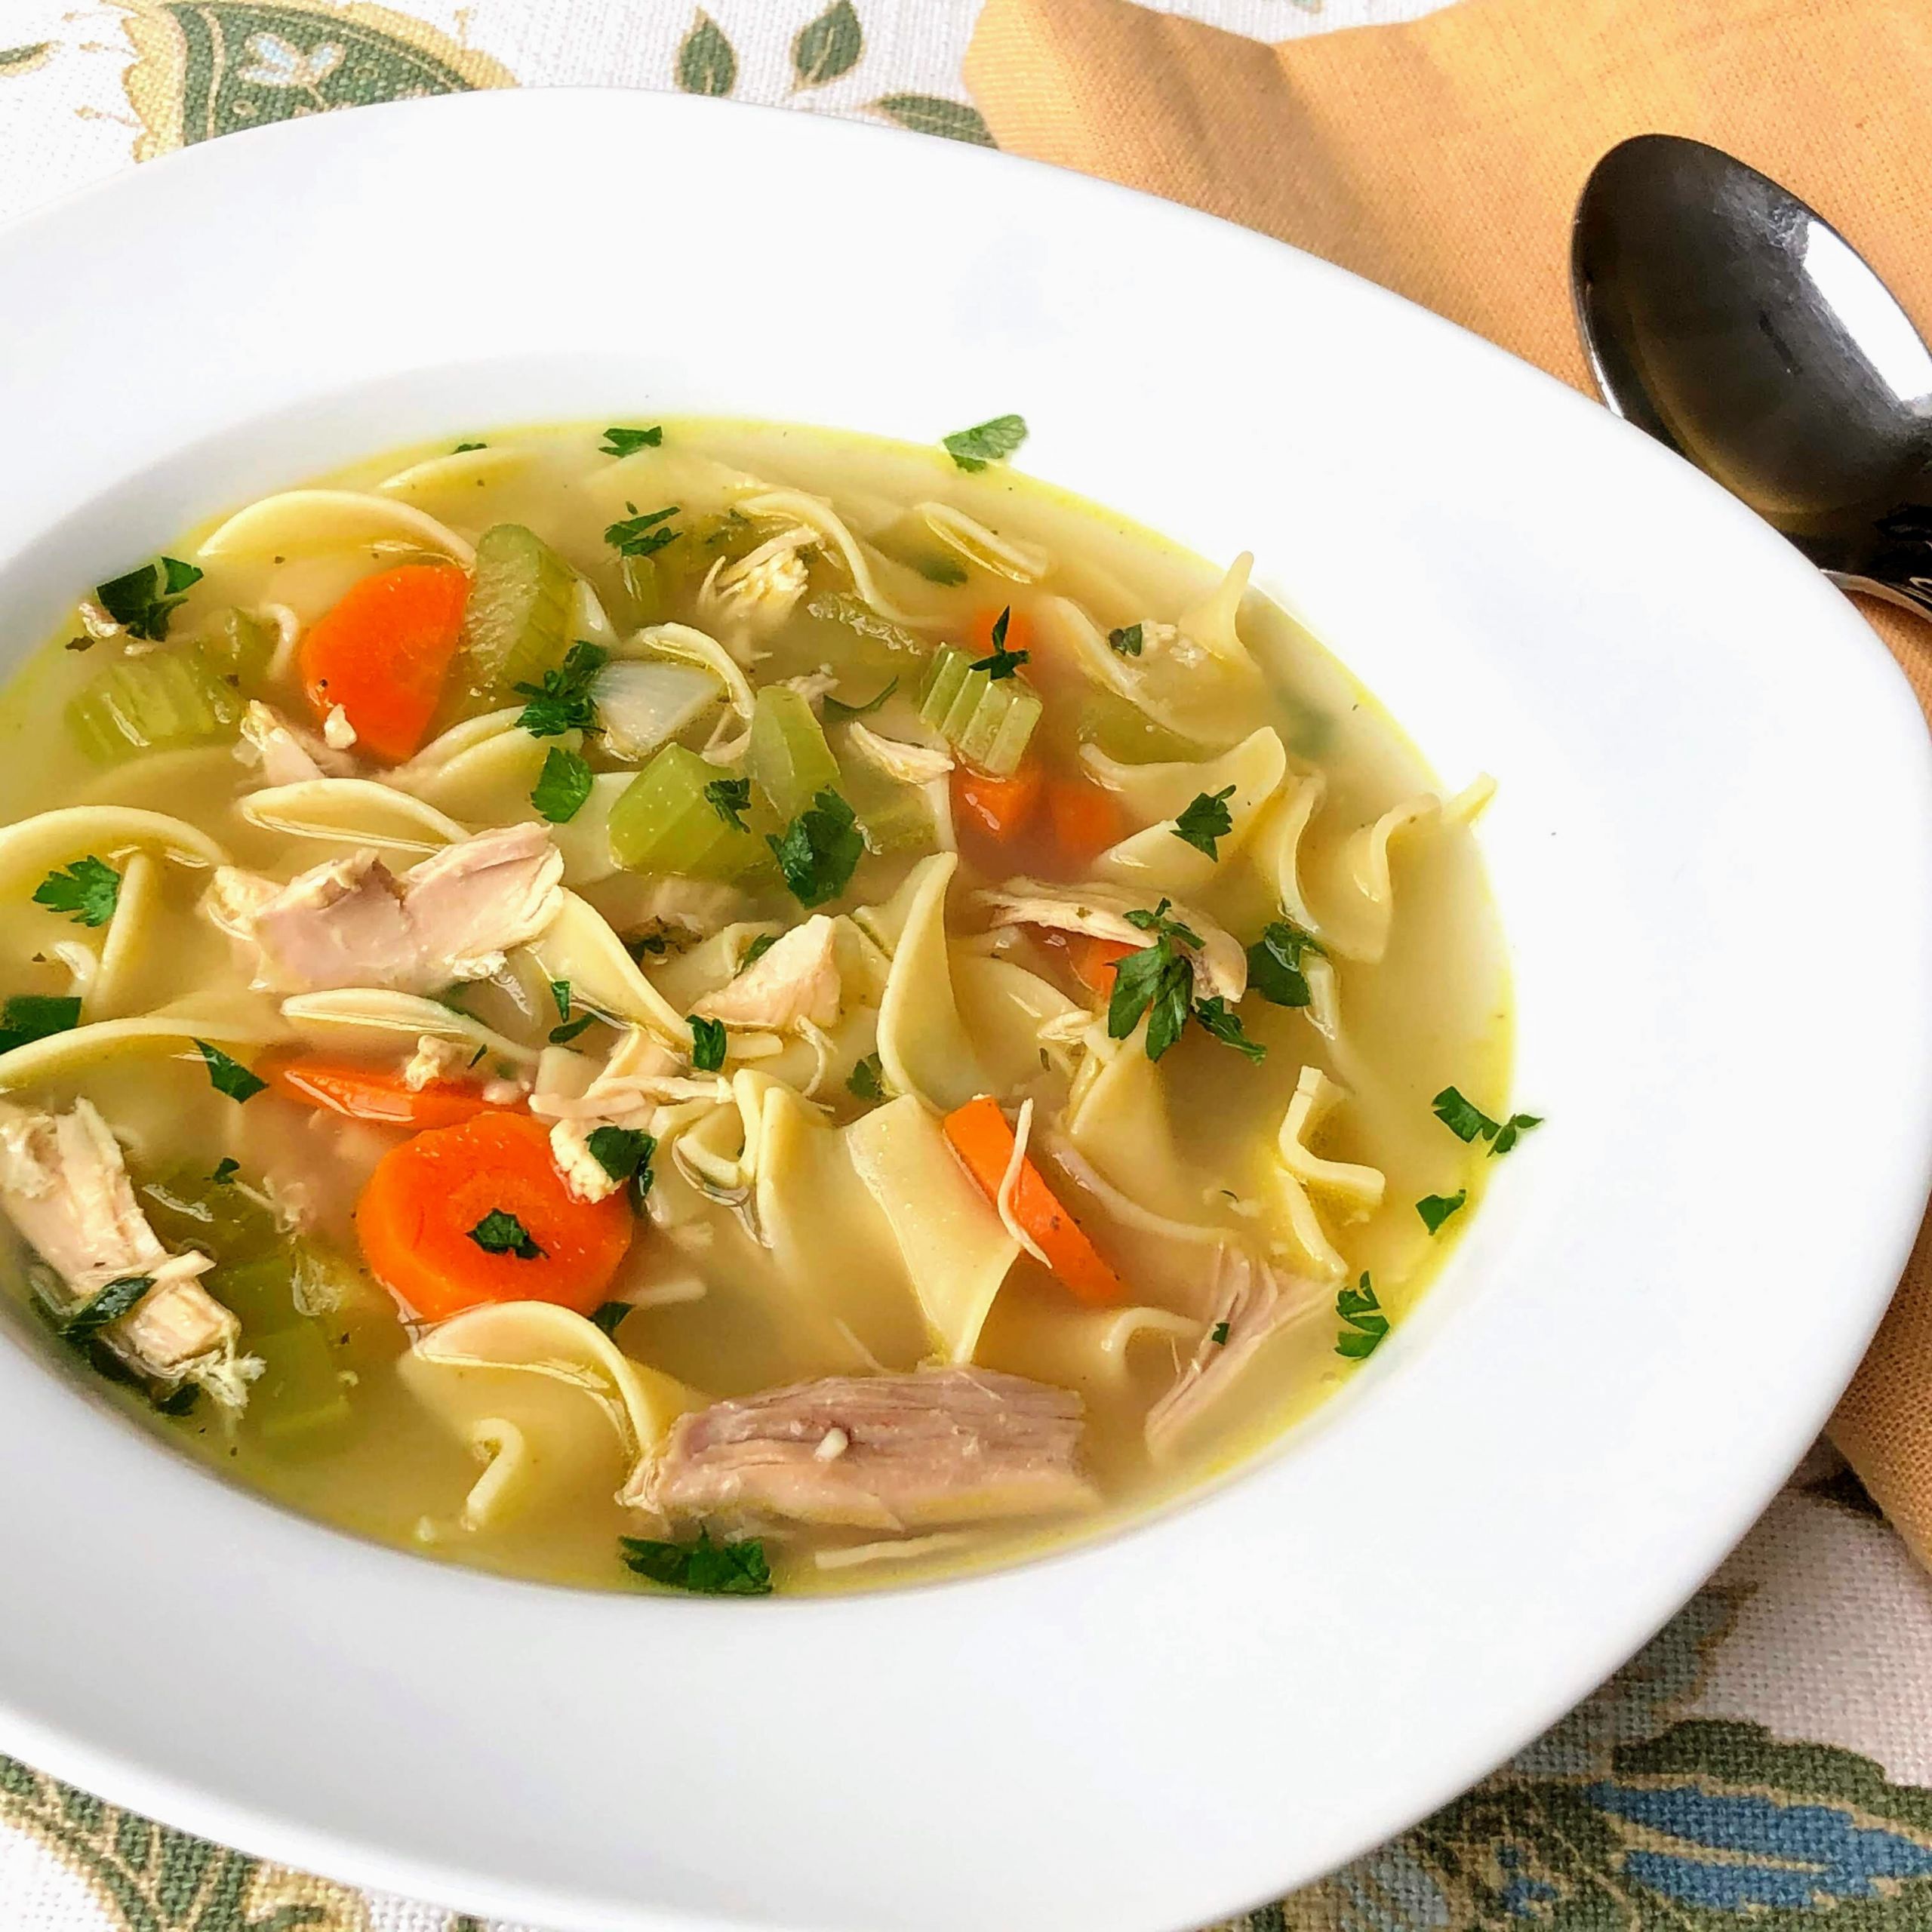 Chicken Egg Noodles soup Inspirational Chicken Noodle soup with Egg Noodles Recipe